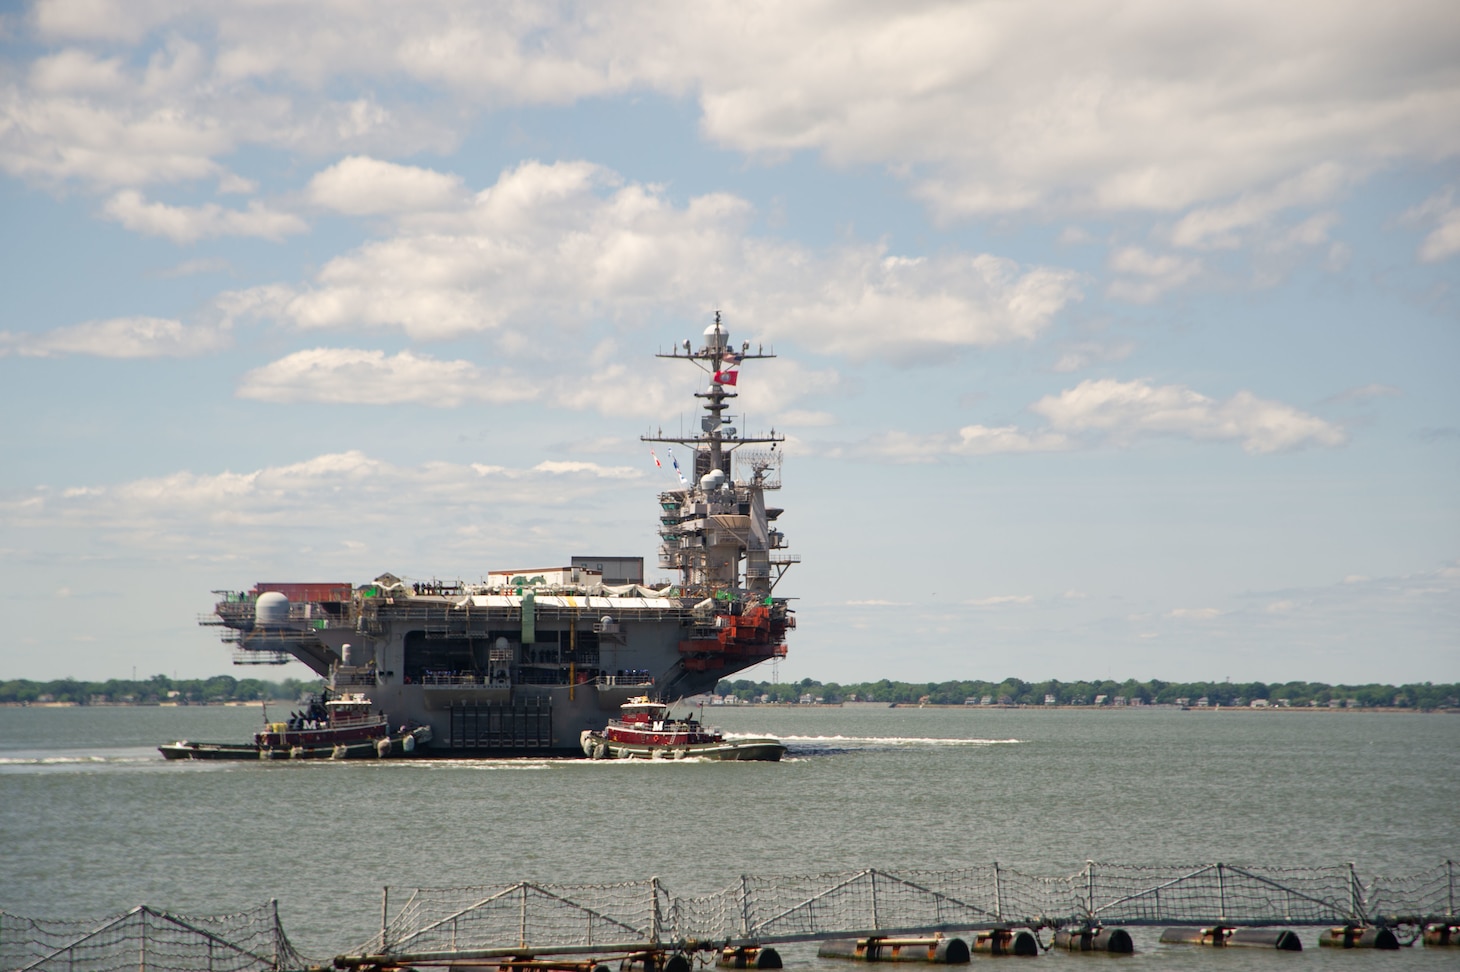 USS John C. Stennis (CVN 74) gets underway from Naval Station Norfolk as it transits to Newport News Shipbuilding (NNS) for Refueling and Complex Overhaul (RCOH) in Newport News, Va.